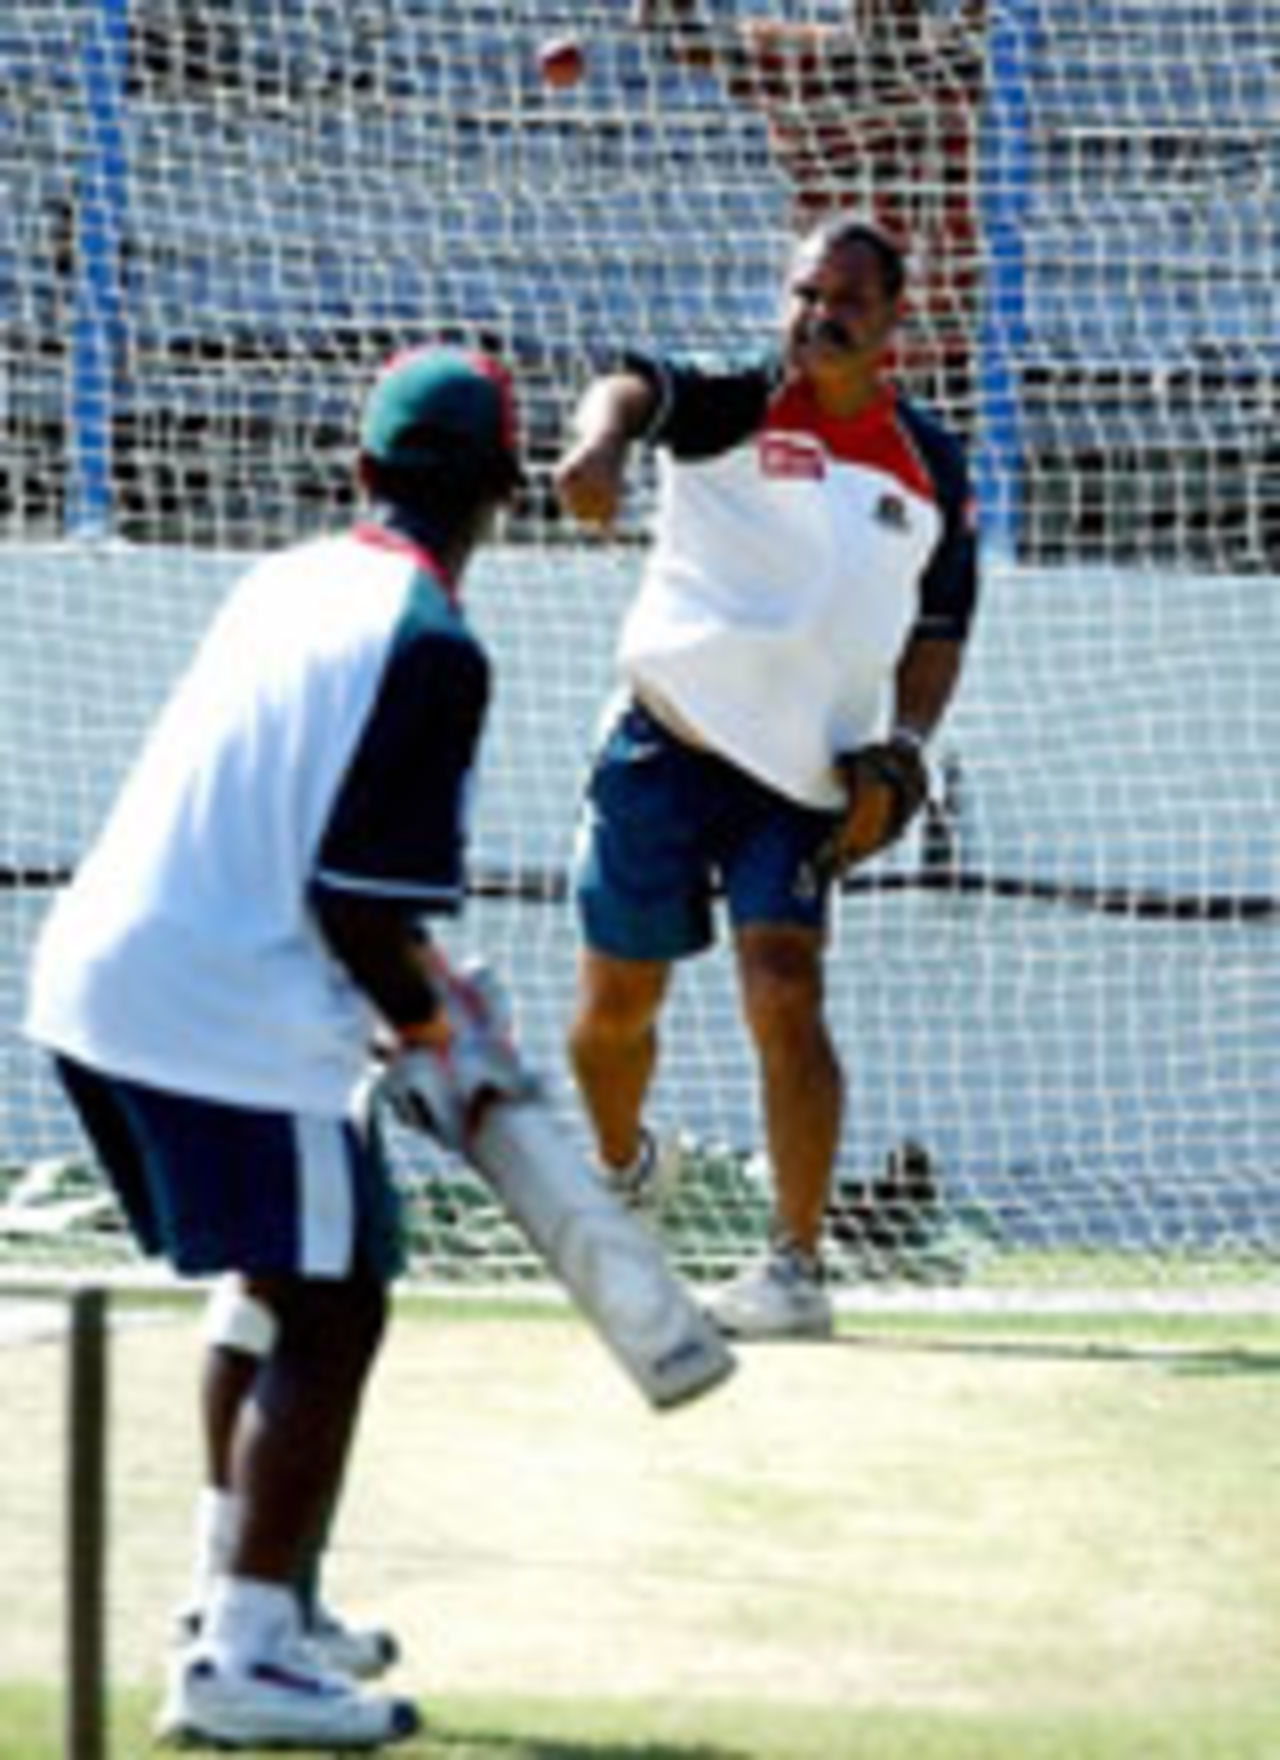 Dav Whatmore practising with Nafis Iqbal before the second Test at Chittagong, 25 October 2004